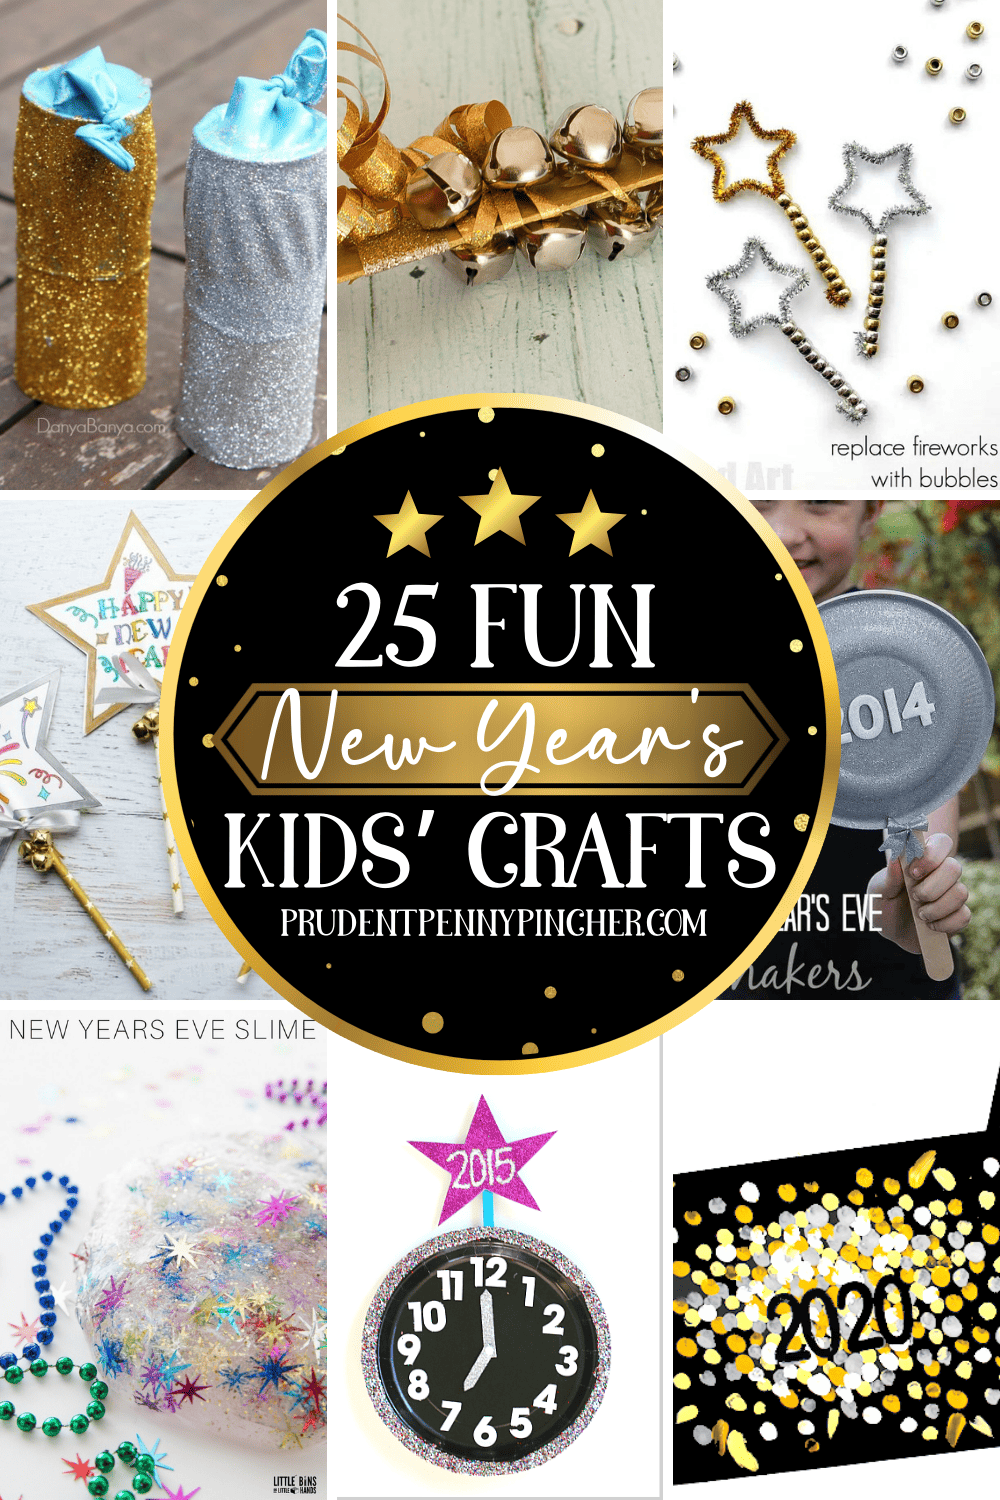 New Year's Crafts for Kids